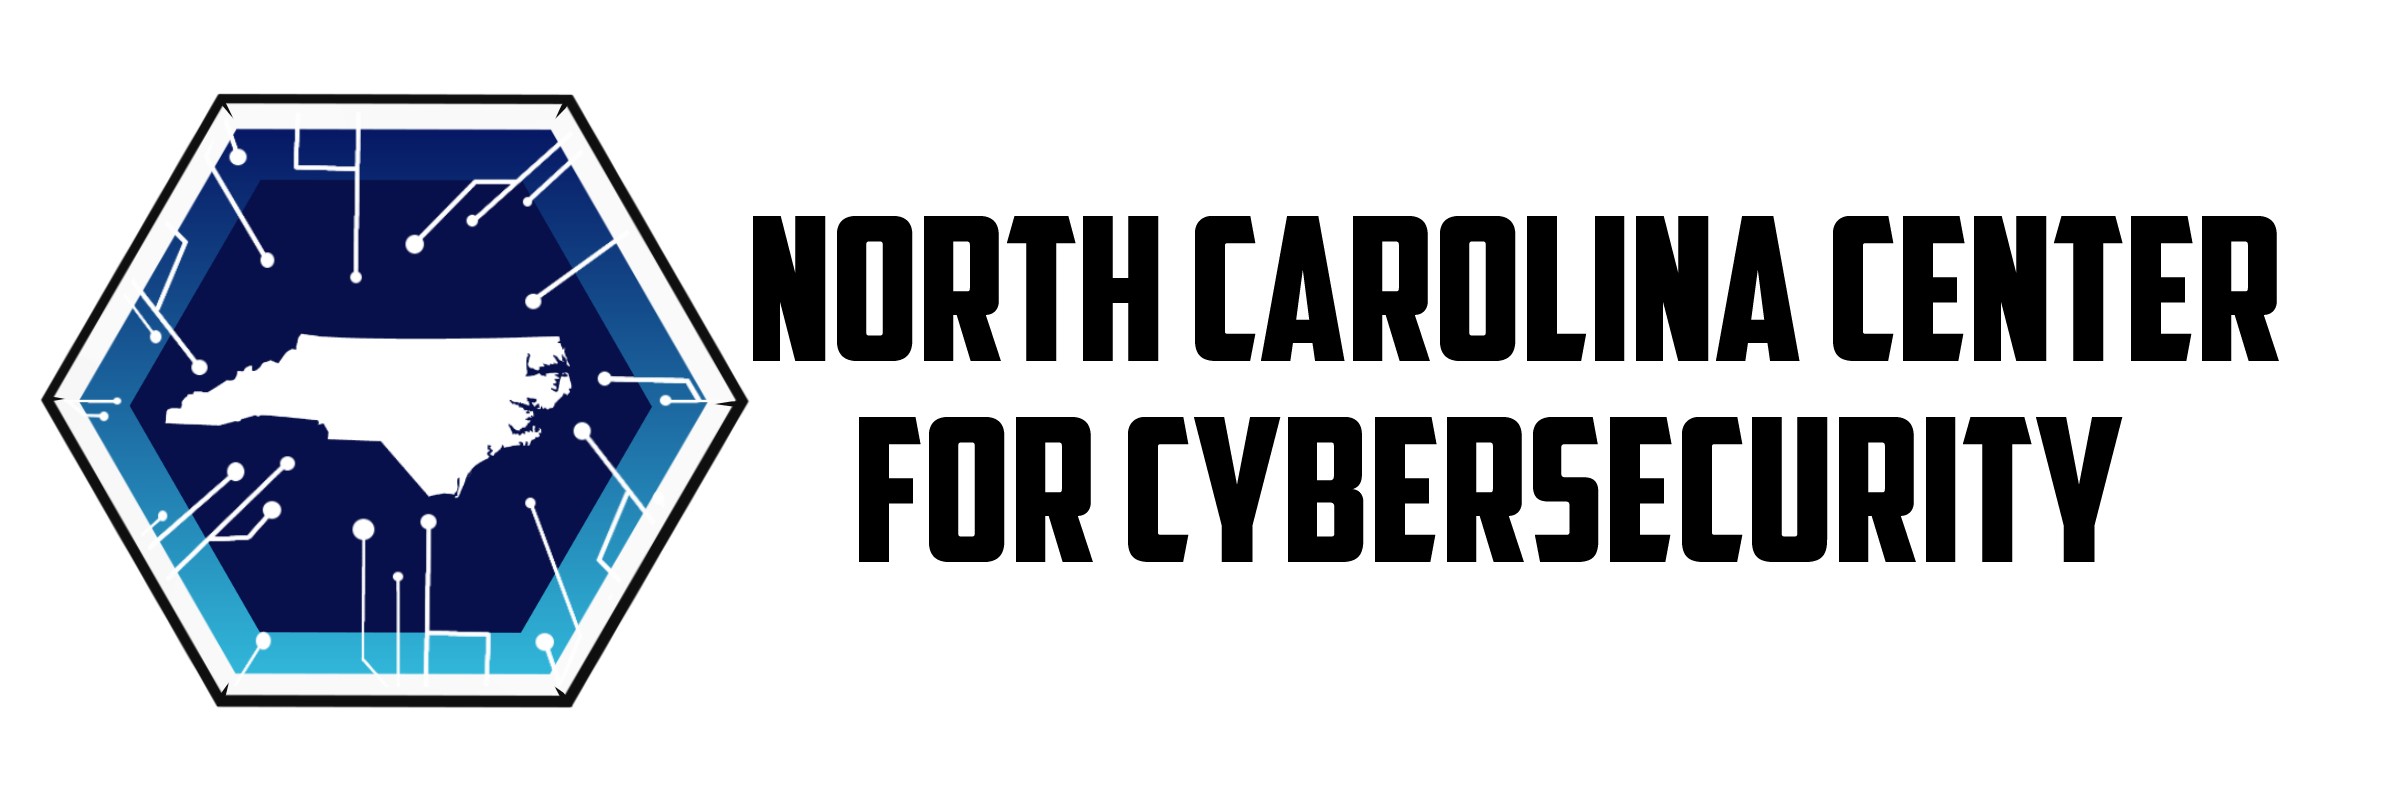 The North Carolina Center For Cybersecurity Linkedin